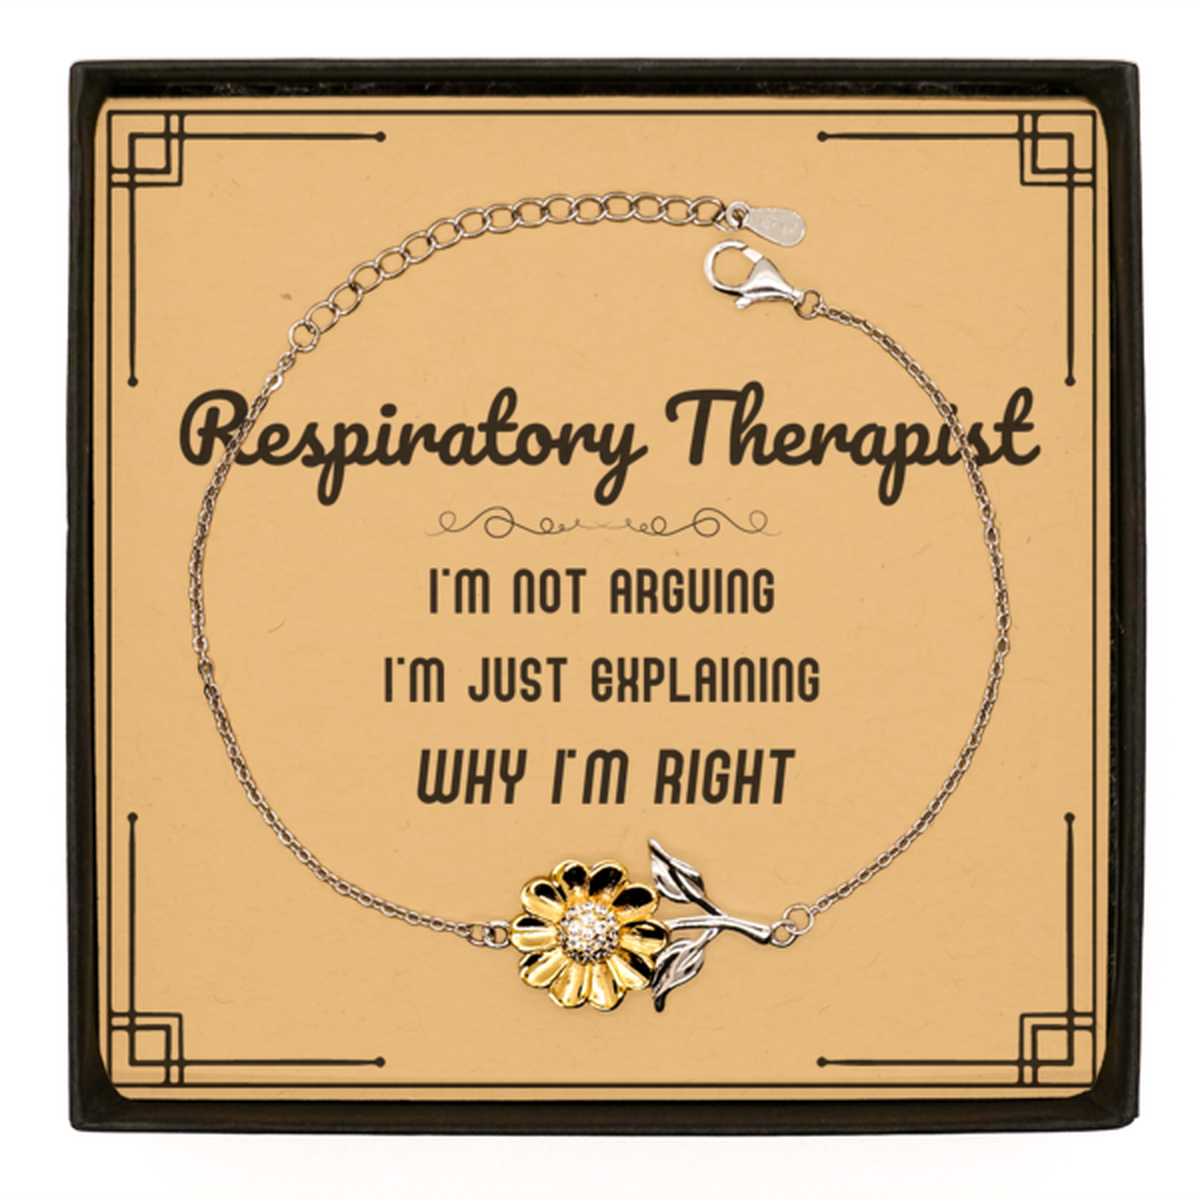 Respiratory Therapist I'm not Arguing. I'm Just Explaining Why I'm RIGHT Sunflower Bracelet, Funny Saying Quote Respiratory Therapist Gifts For Respiratory Therapist Message Card Graduation Birthday Christmas Gifts for Men Women Coworker